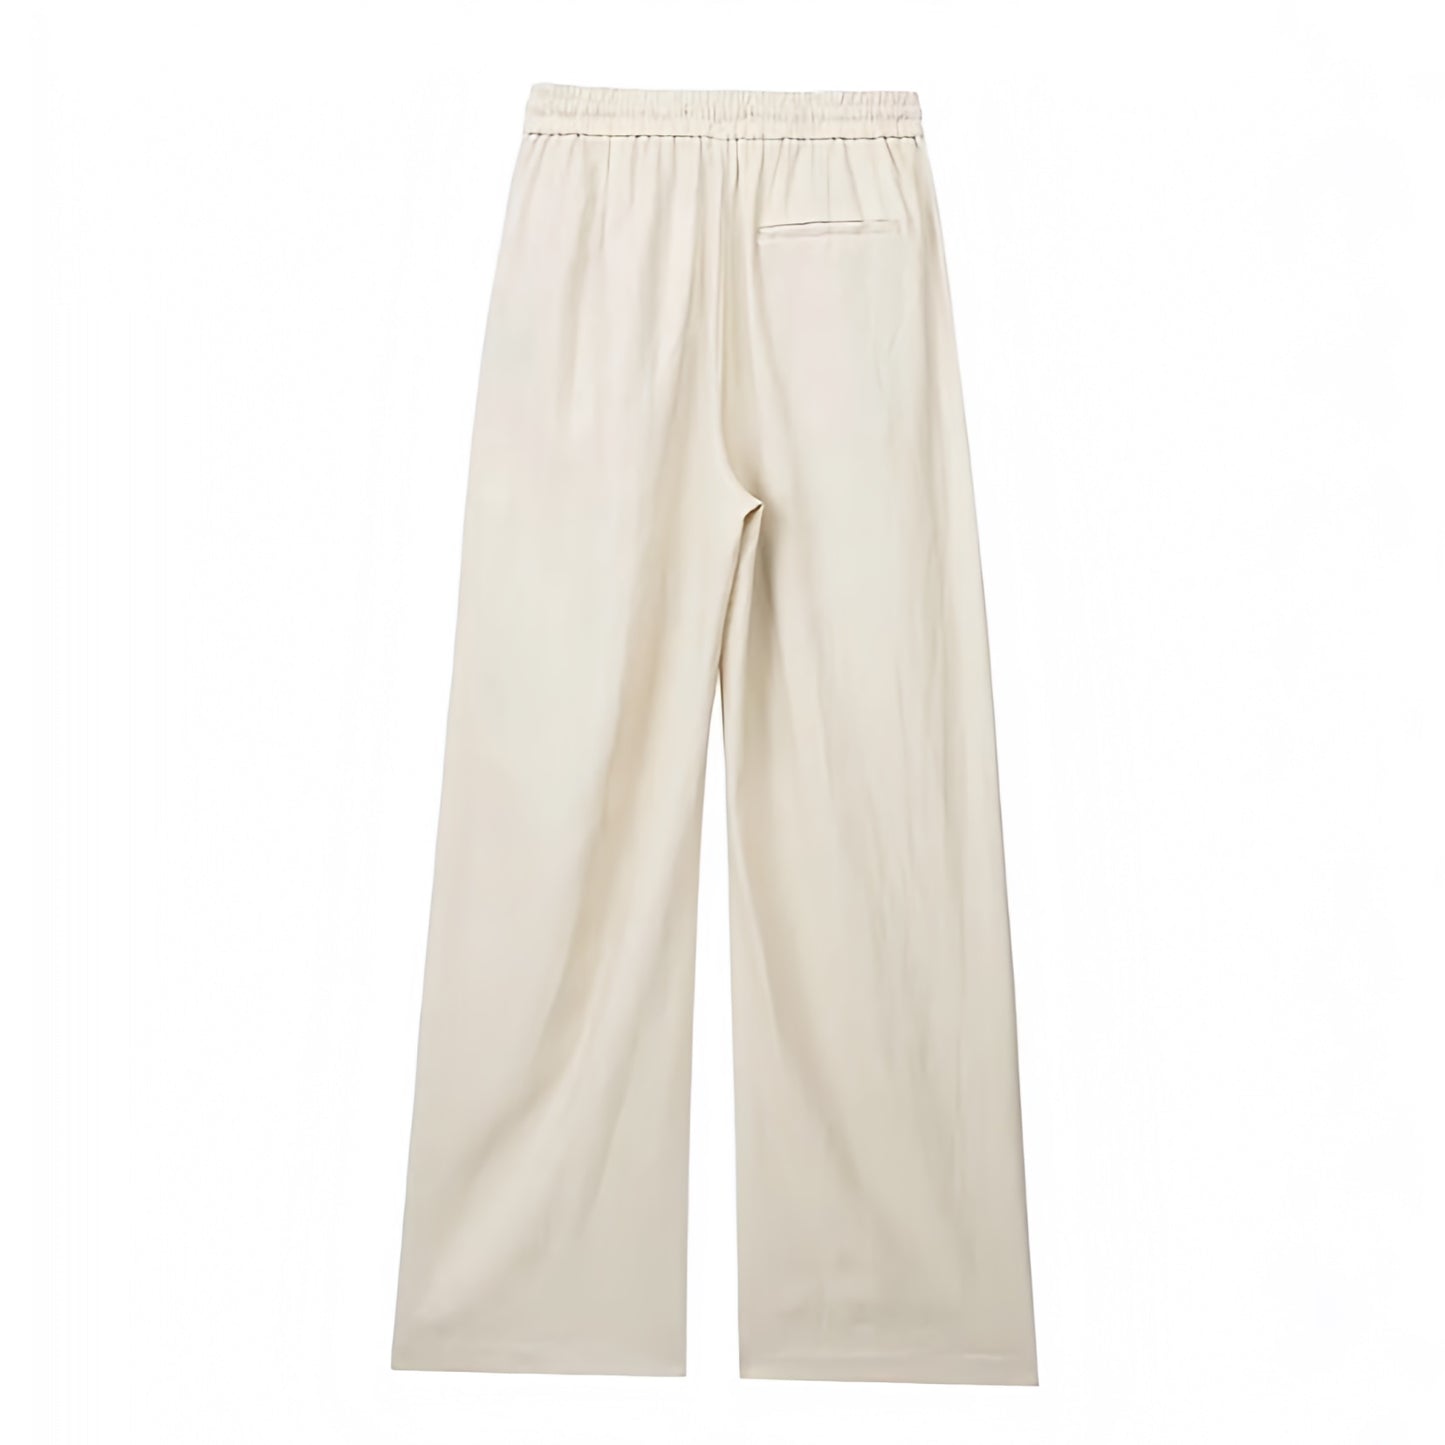 beige-khaki-neutral-cotton-linen-mid-low-rise-waisted-draw-string-tie-fitted-waist-straight-wide-leg-loose-light-weight-trouser-pants-joggers-sweatpants-with-pockets-comfortable-cozy-women-ladies-chic-trendy-spring-2024-summer-elegant-casual-feminine-lounge-european-vacation-beach-wear-zara-revolve-aritzia-brandy-melville-pacsun